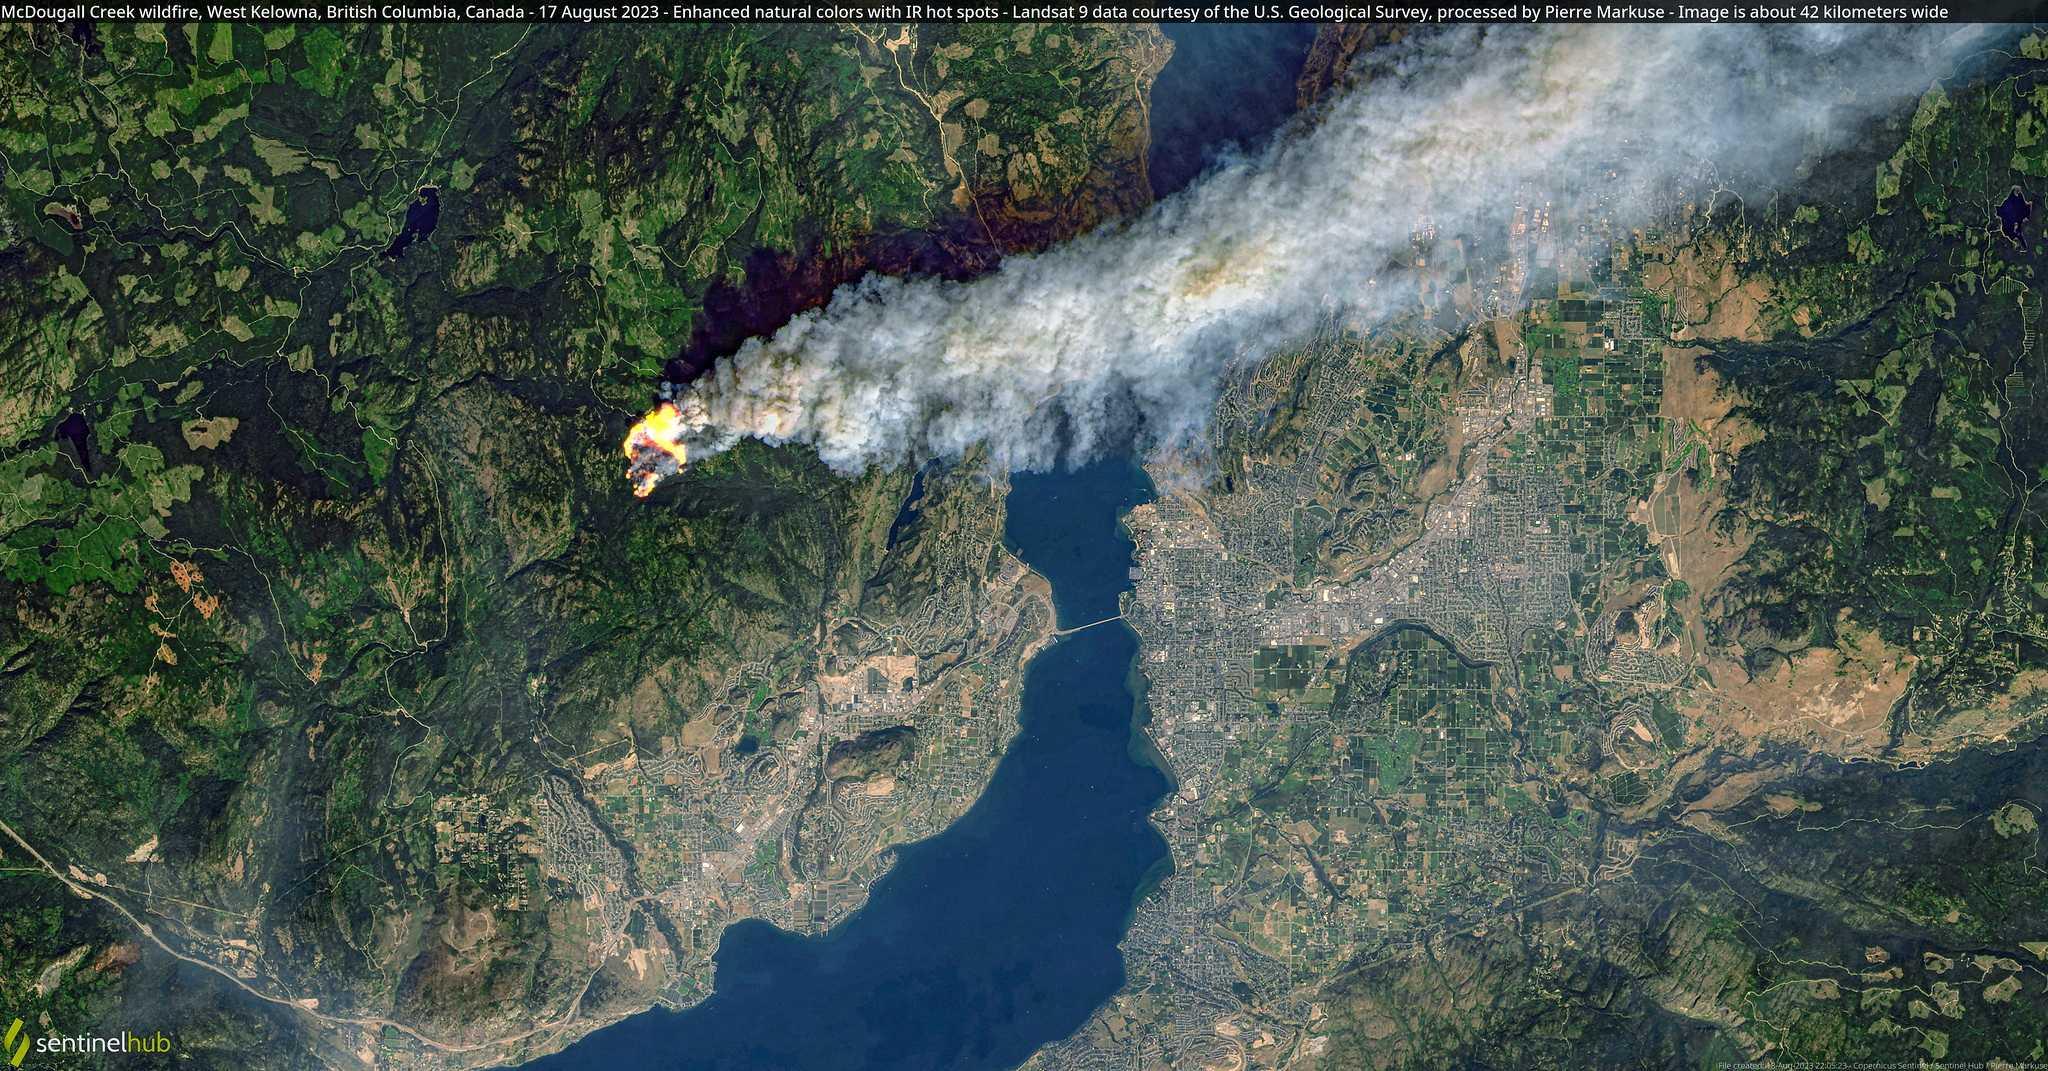 2023-08-18T232613Z_586410495_RC2NQ2A3J9FH_RTRMADP_3_CANADA-WILDFIRES